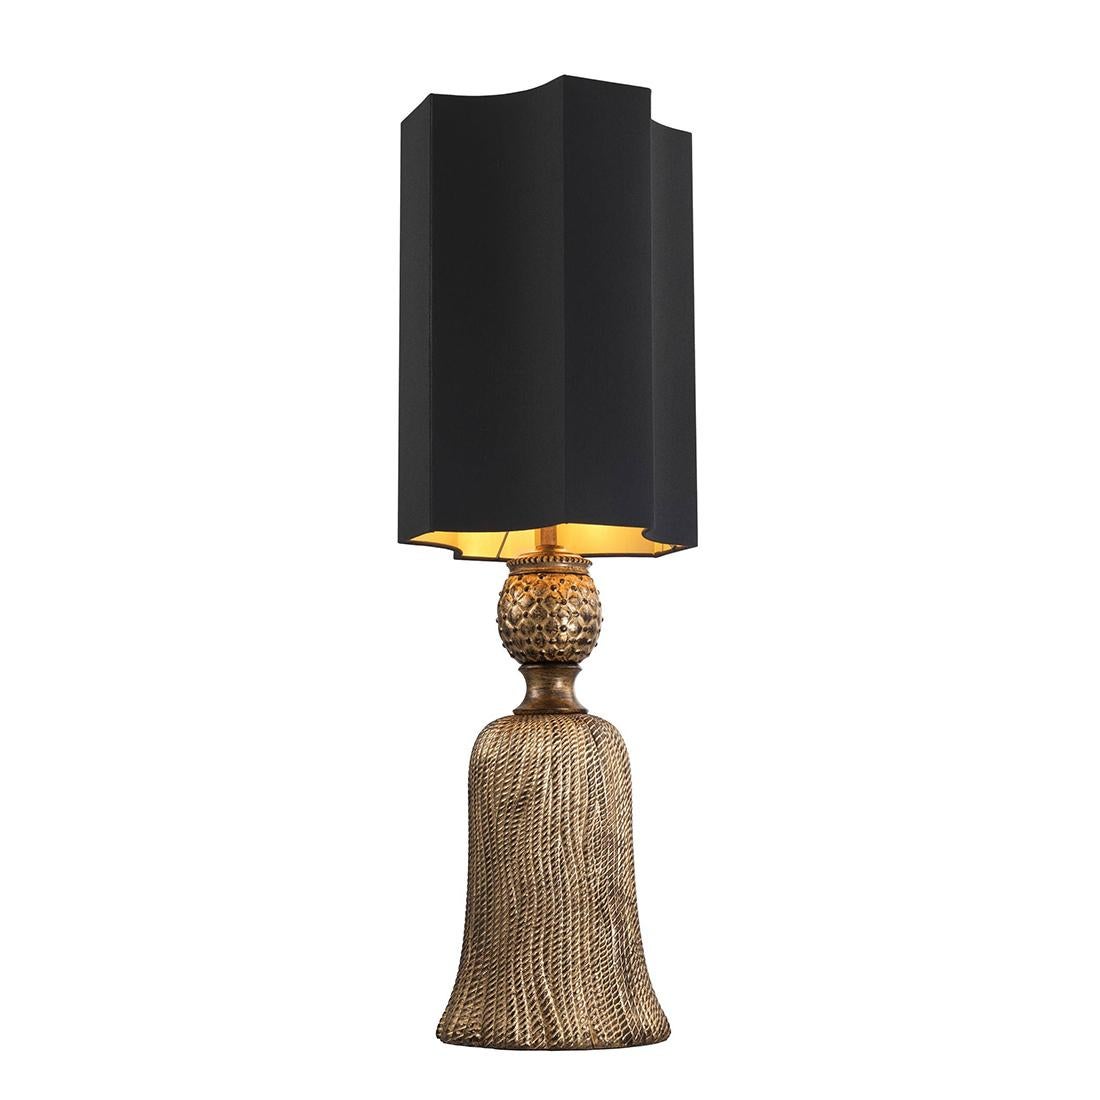 Table Lamp Firenze with base in
solid brass in antique gold finish.
With black shade included. With
1 bulb, lamp holder type E27, max
40 watt. Bulb not included.